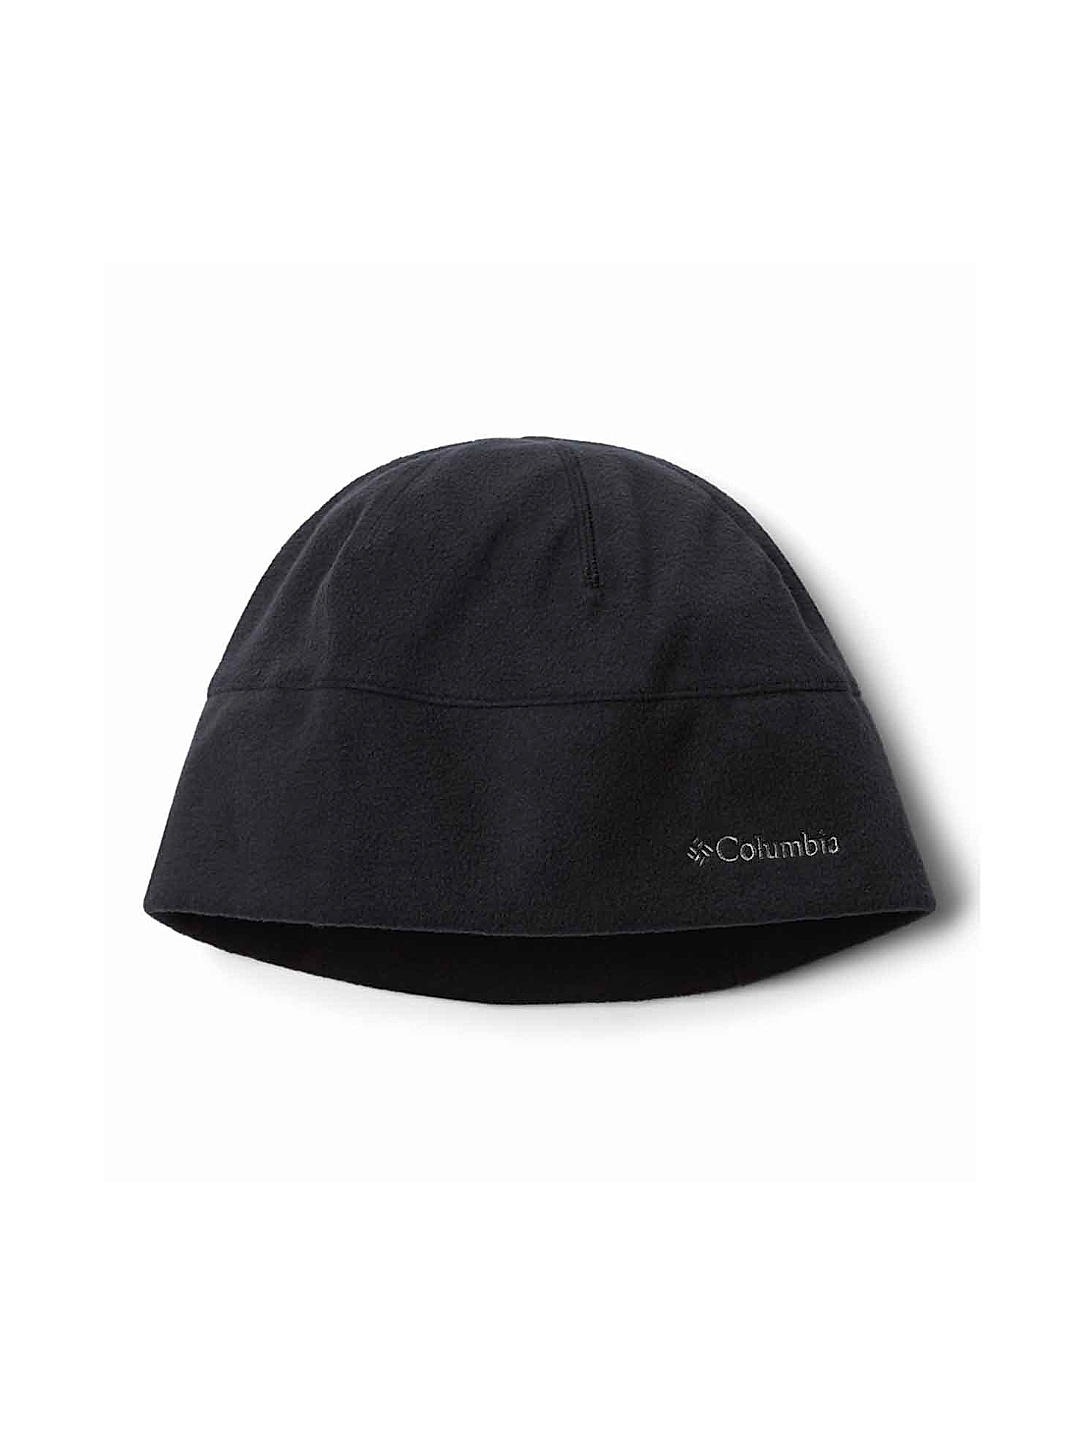 Buy Black Trail Shaker Beanie for Men and Women Online at Columbia  Sportswear